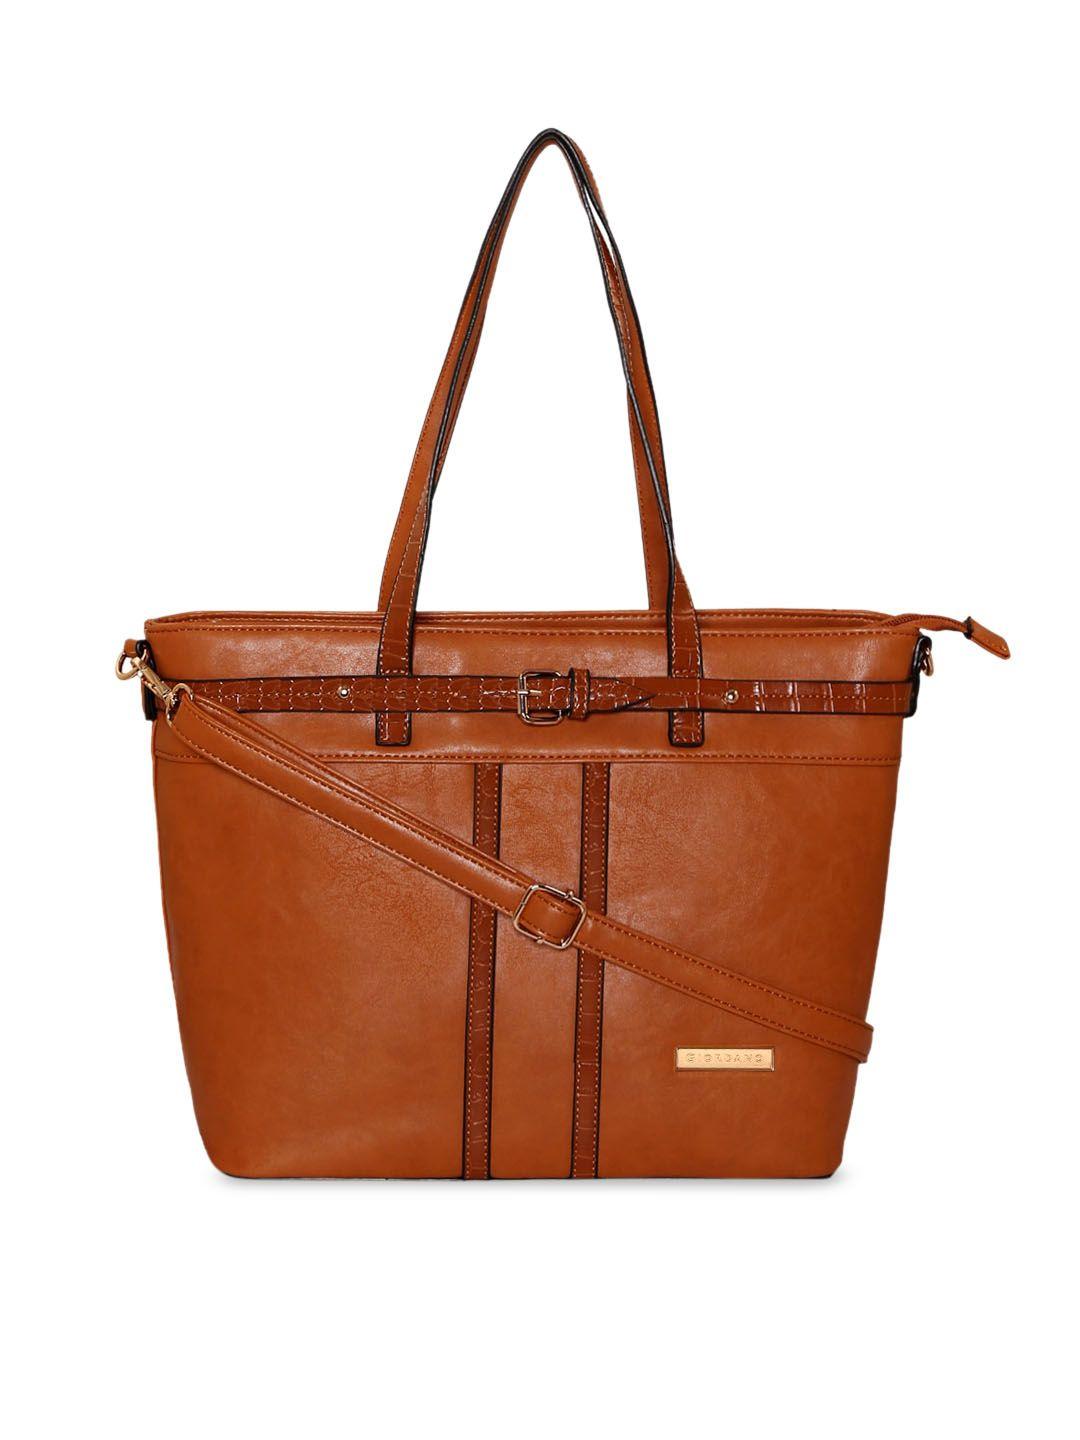 giordano-brown-solid-tote-bag